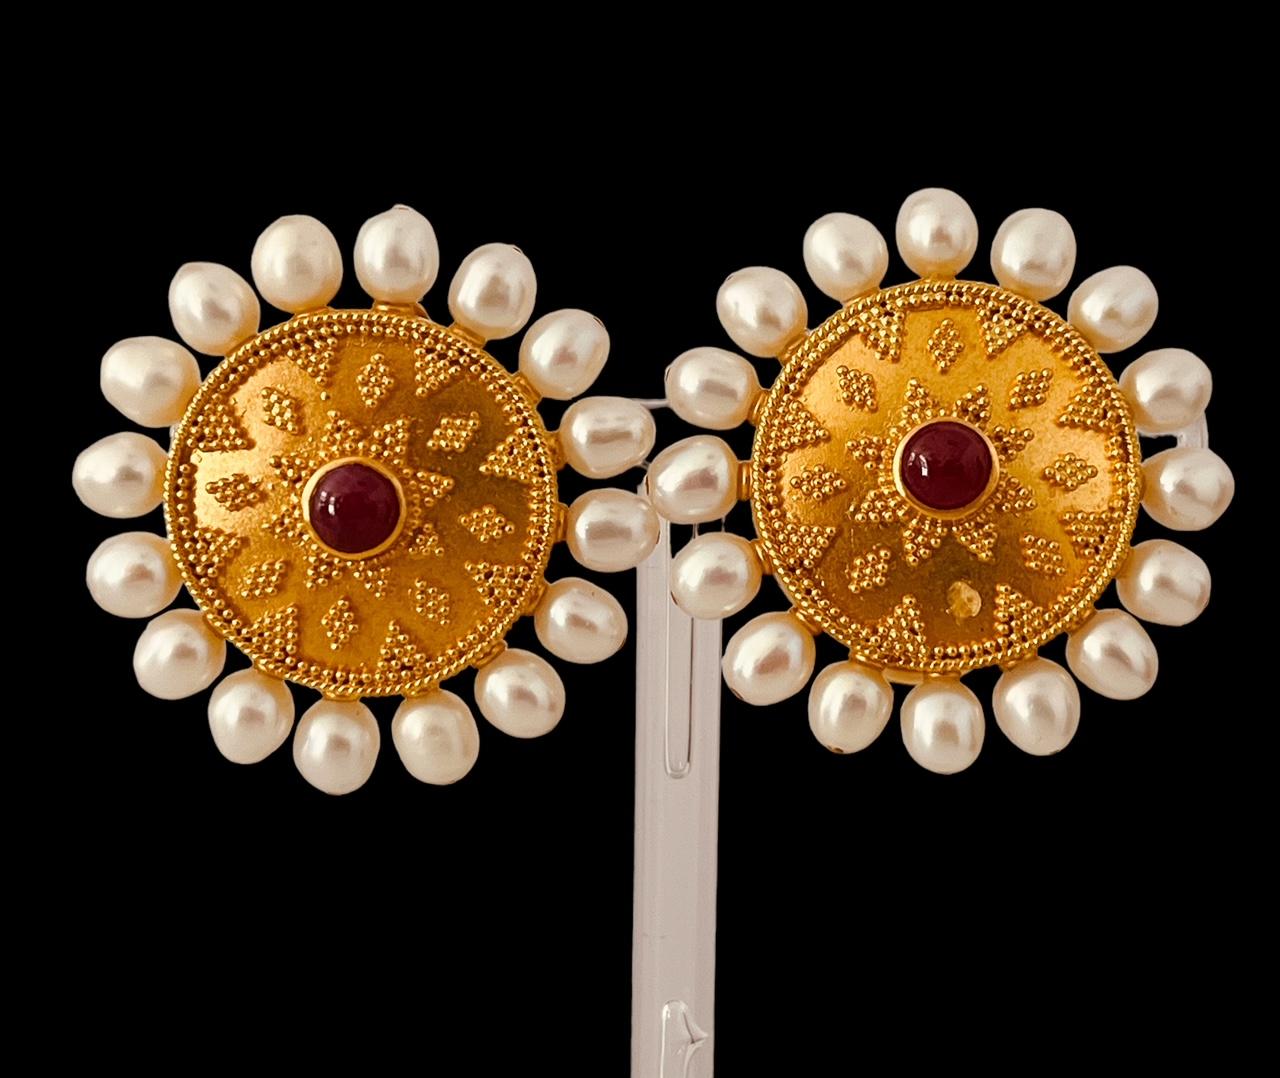 22ct Gold Granulated Disc Earrings Set With A Cabochon Ruby And Cultured Pearls For Sale 3